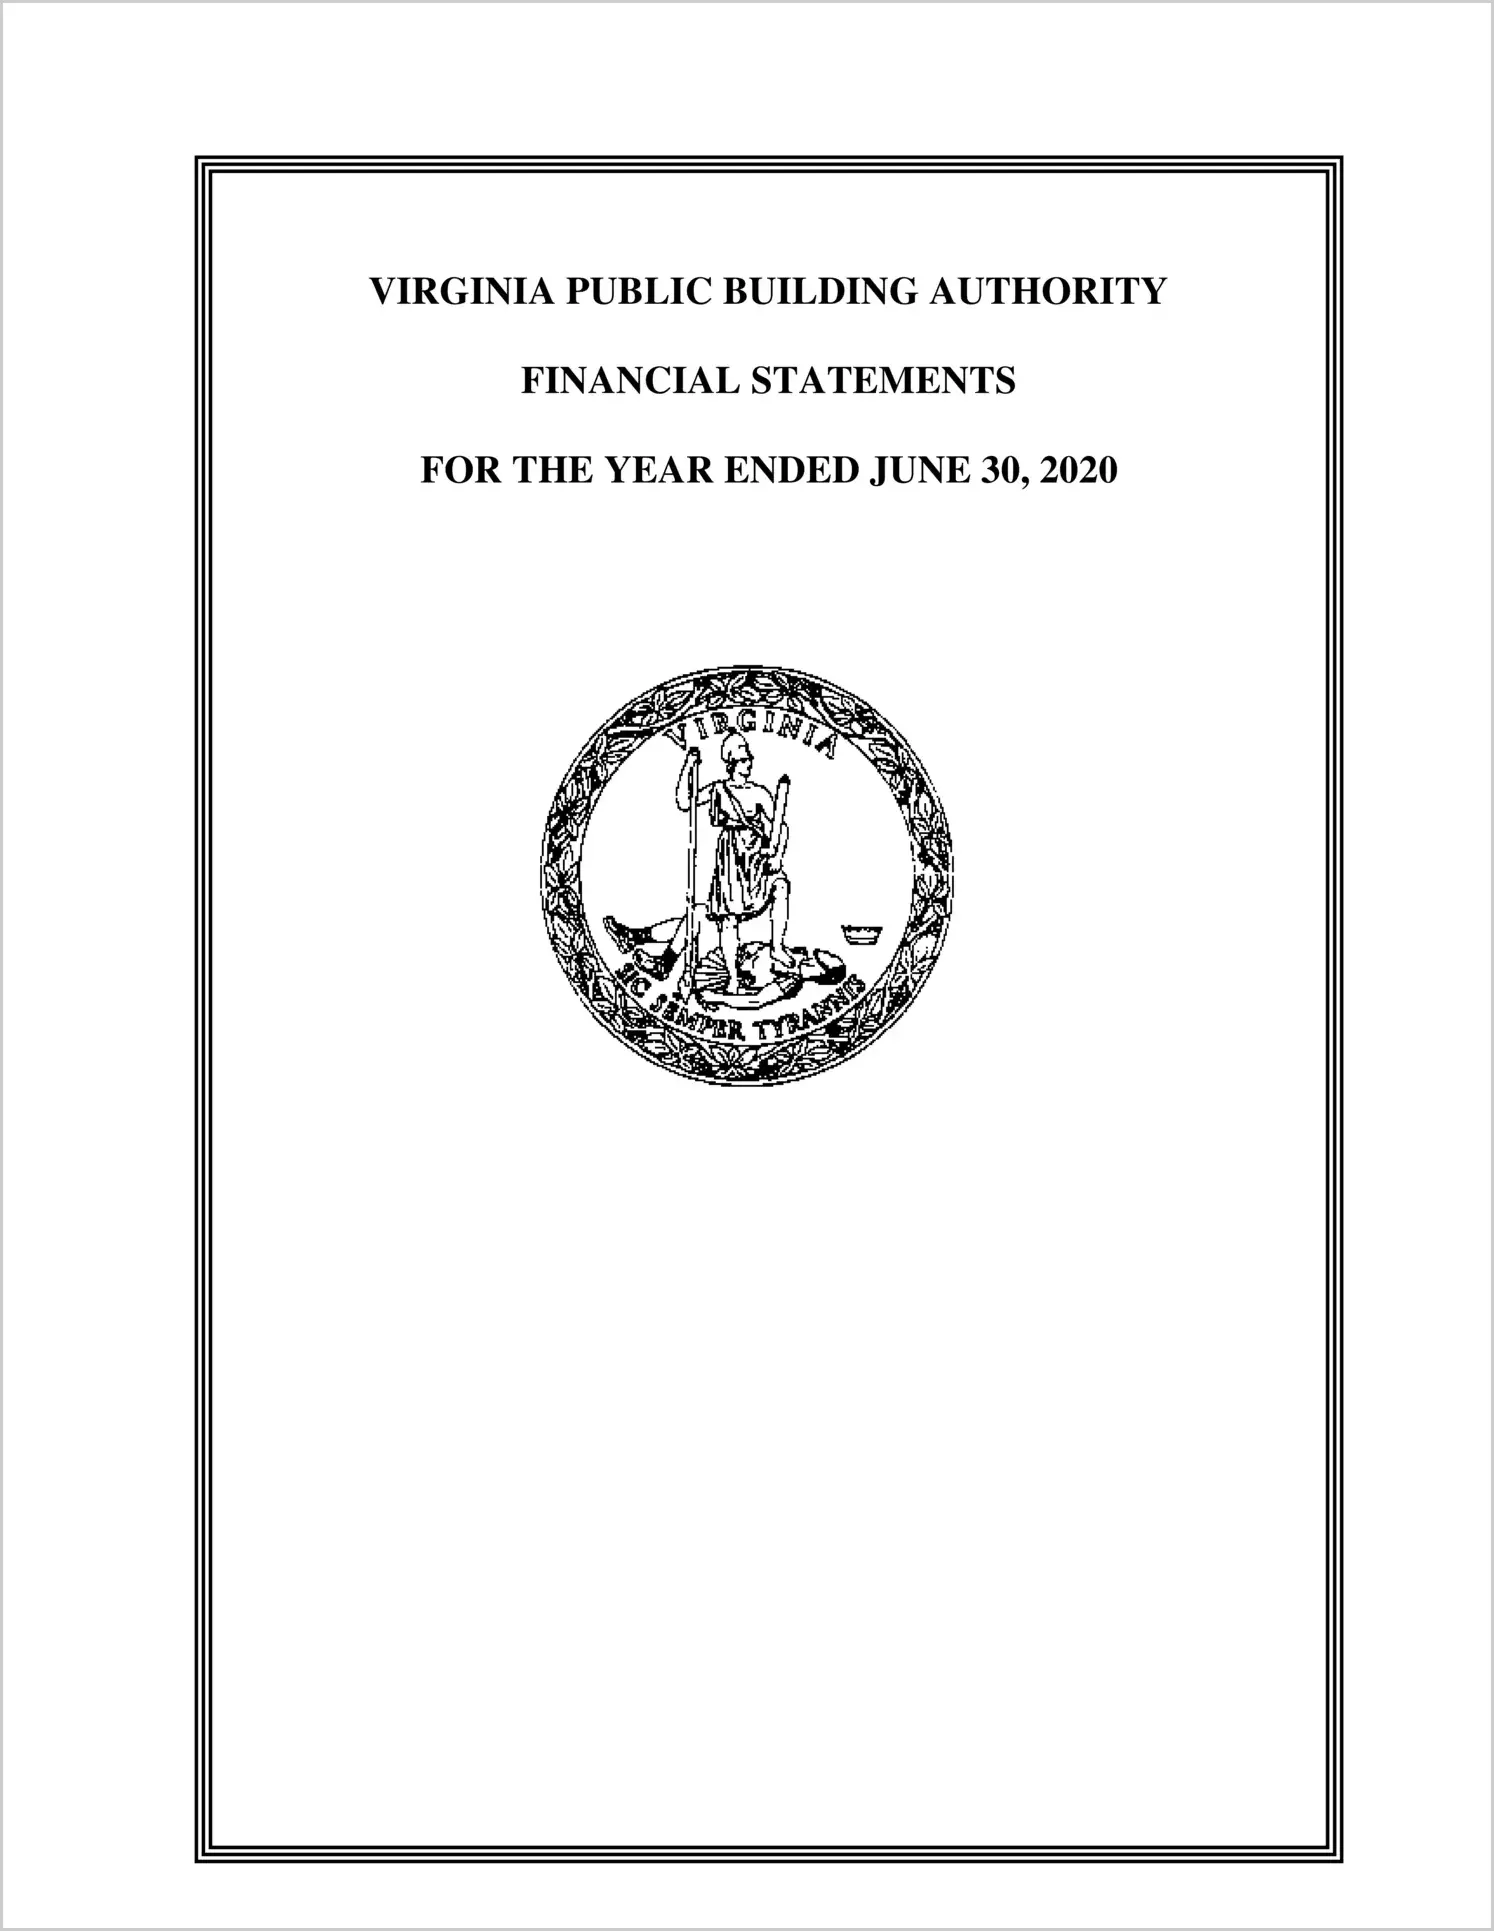 Virginia Public Building Authority Financial Statements for the year ended June 30, 2020